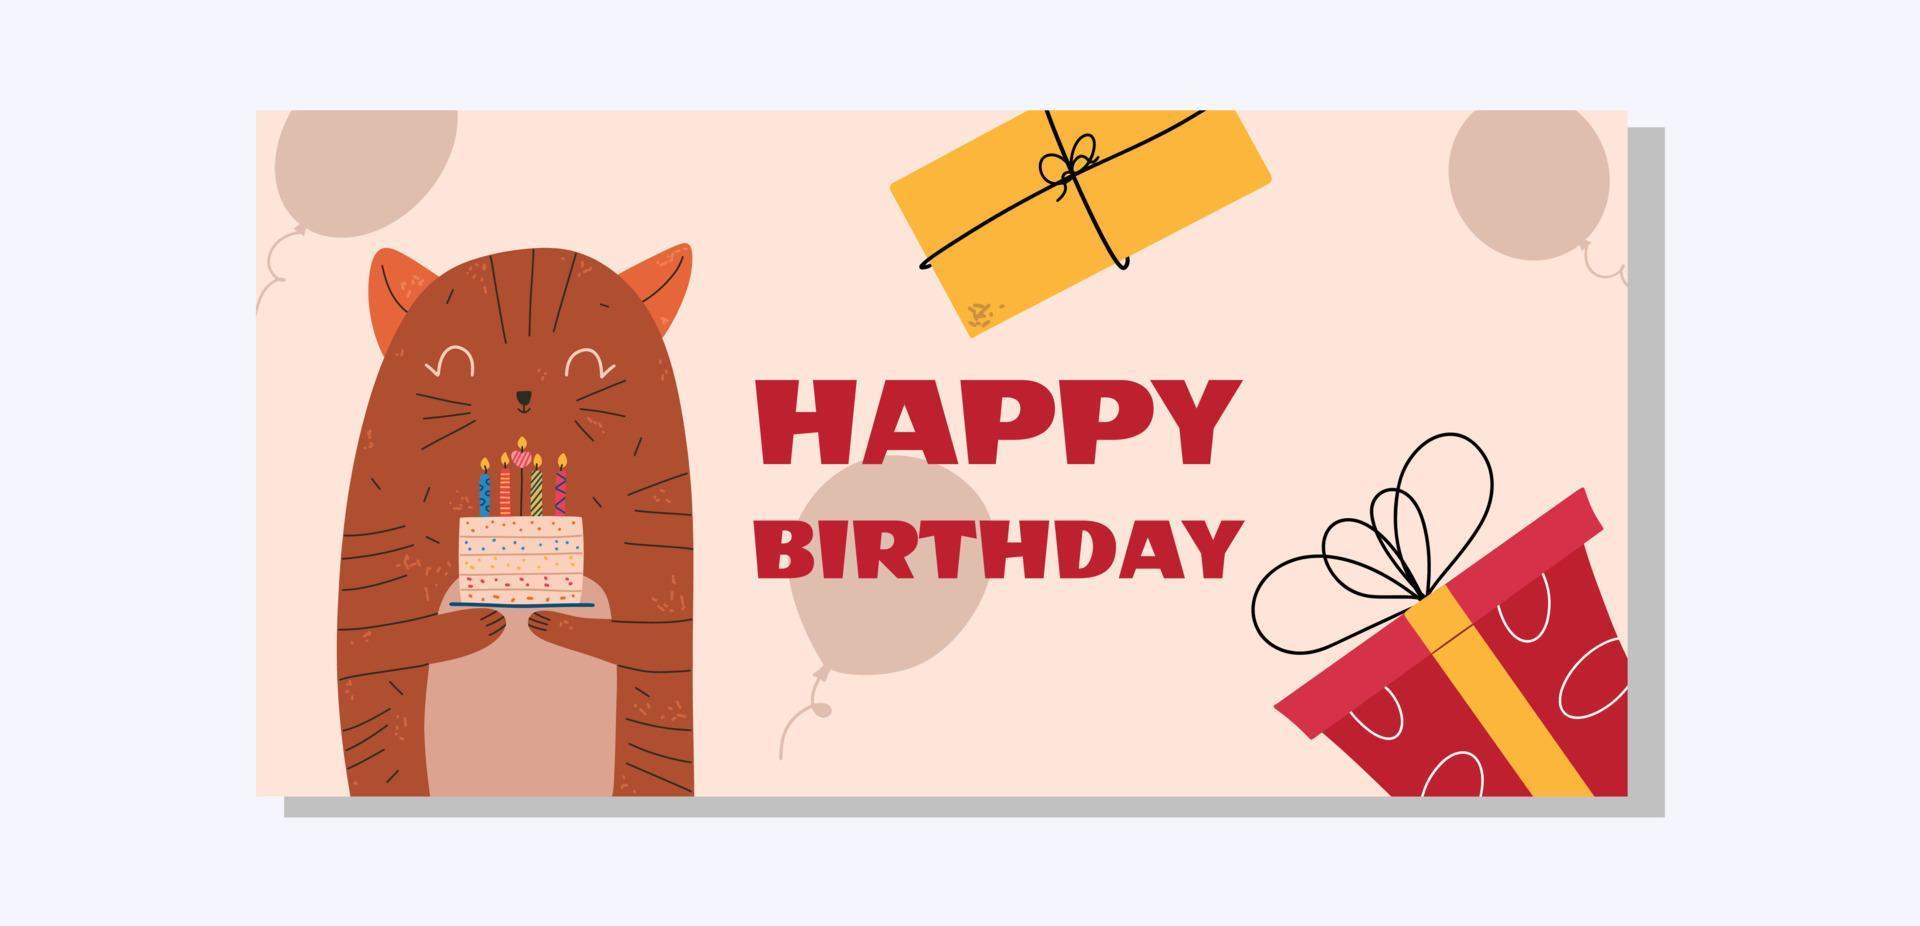 Birthday flat design template with cat, cake and gifts. Vector illustration.